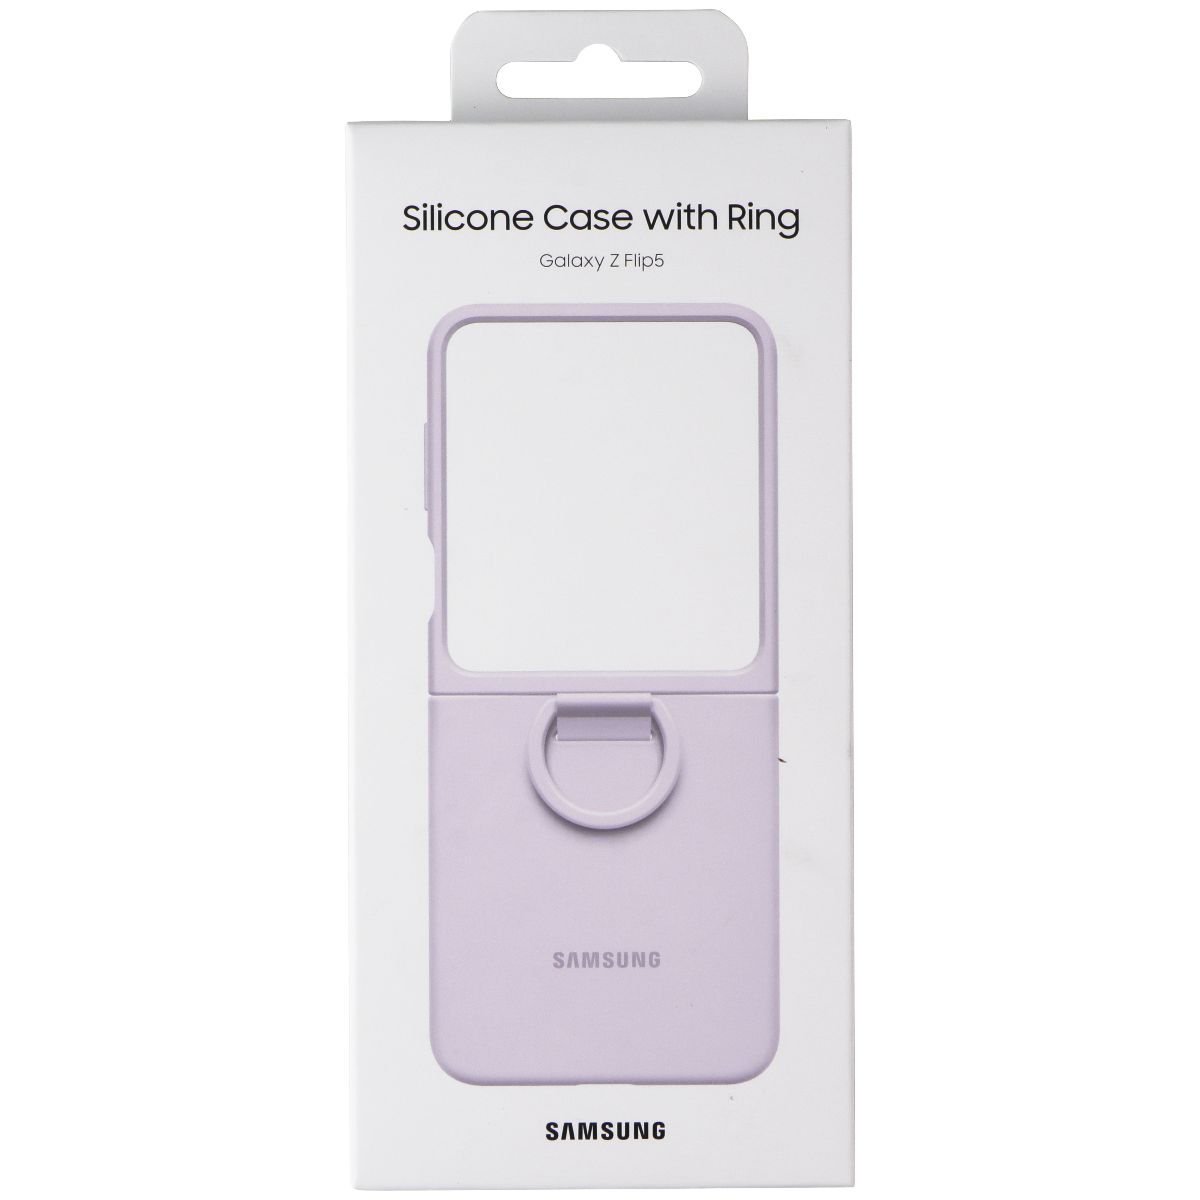 SAMSUNG Official Silicone Cover Case with Ring for Galaxy Z Flip5 - Lavender Cell Phone - Cases, Covers & Skins Samsung    - Simple Cell Bulk Wholesale Pricing - USA Seller